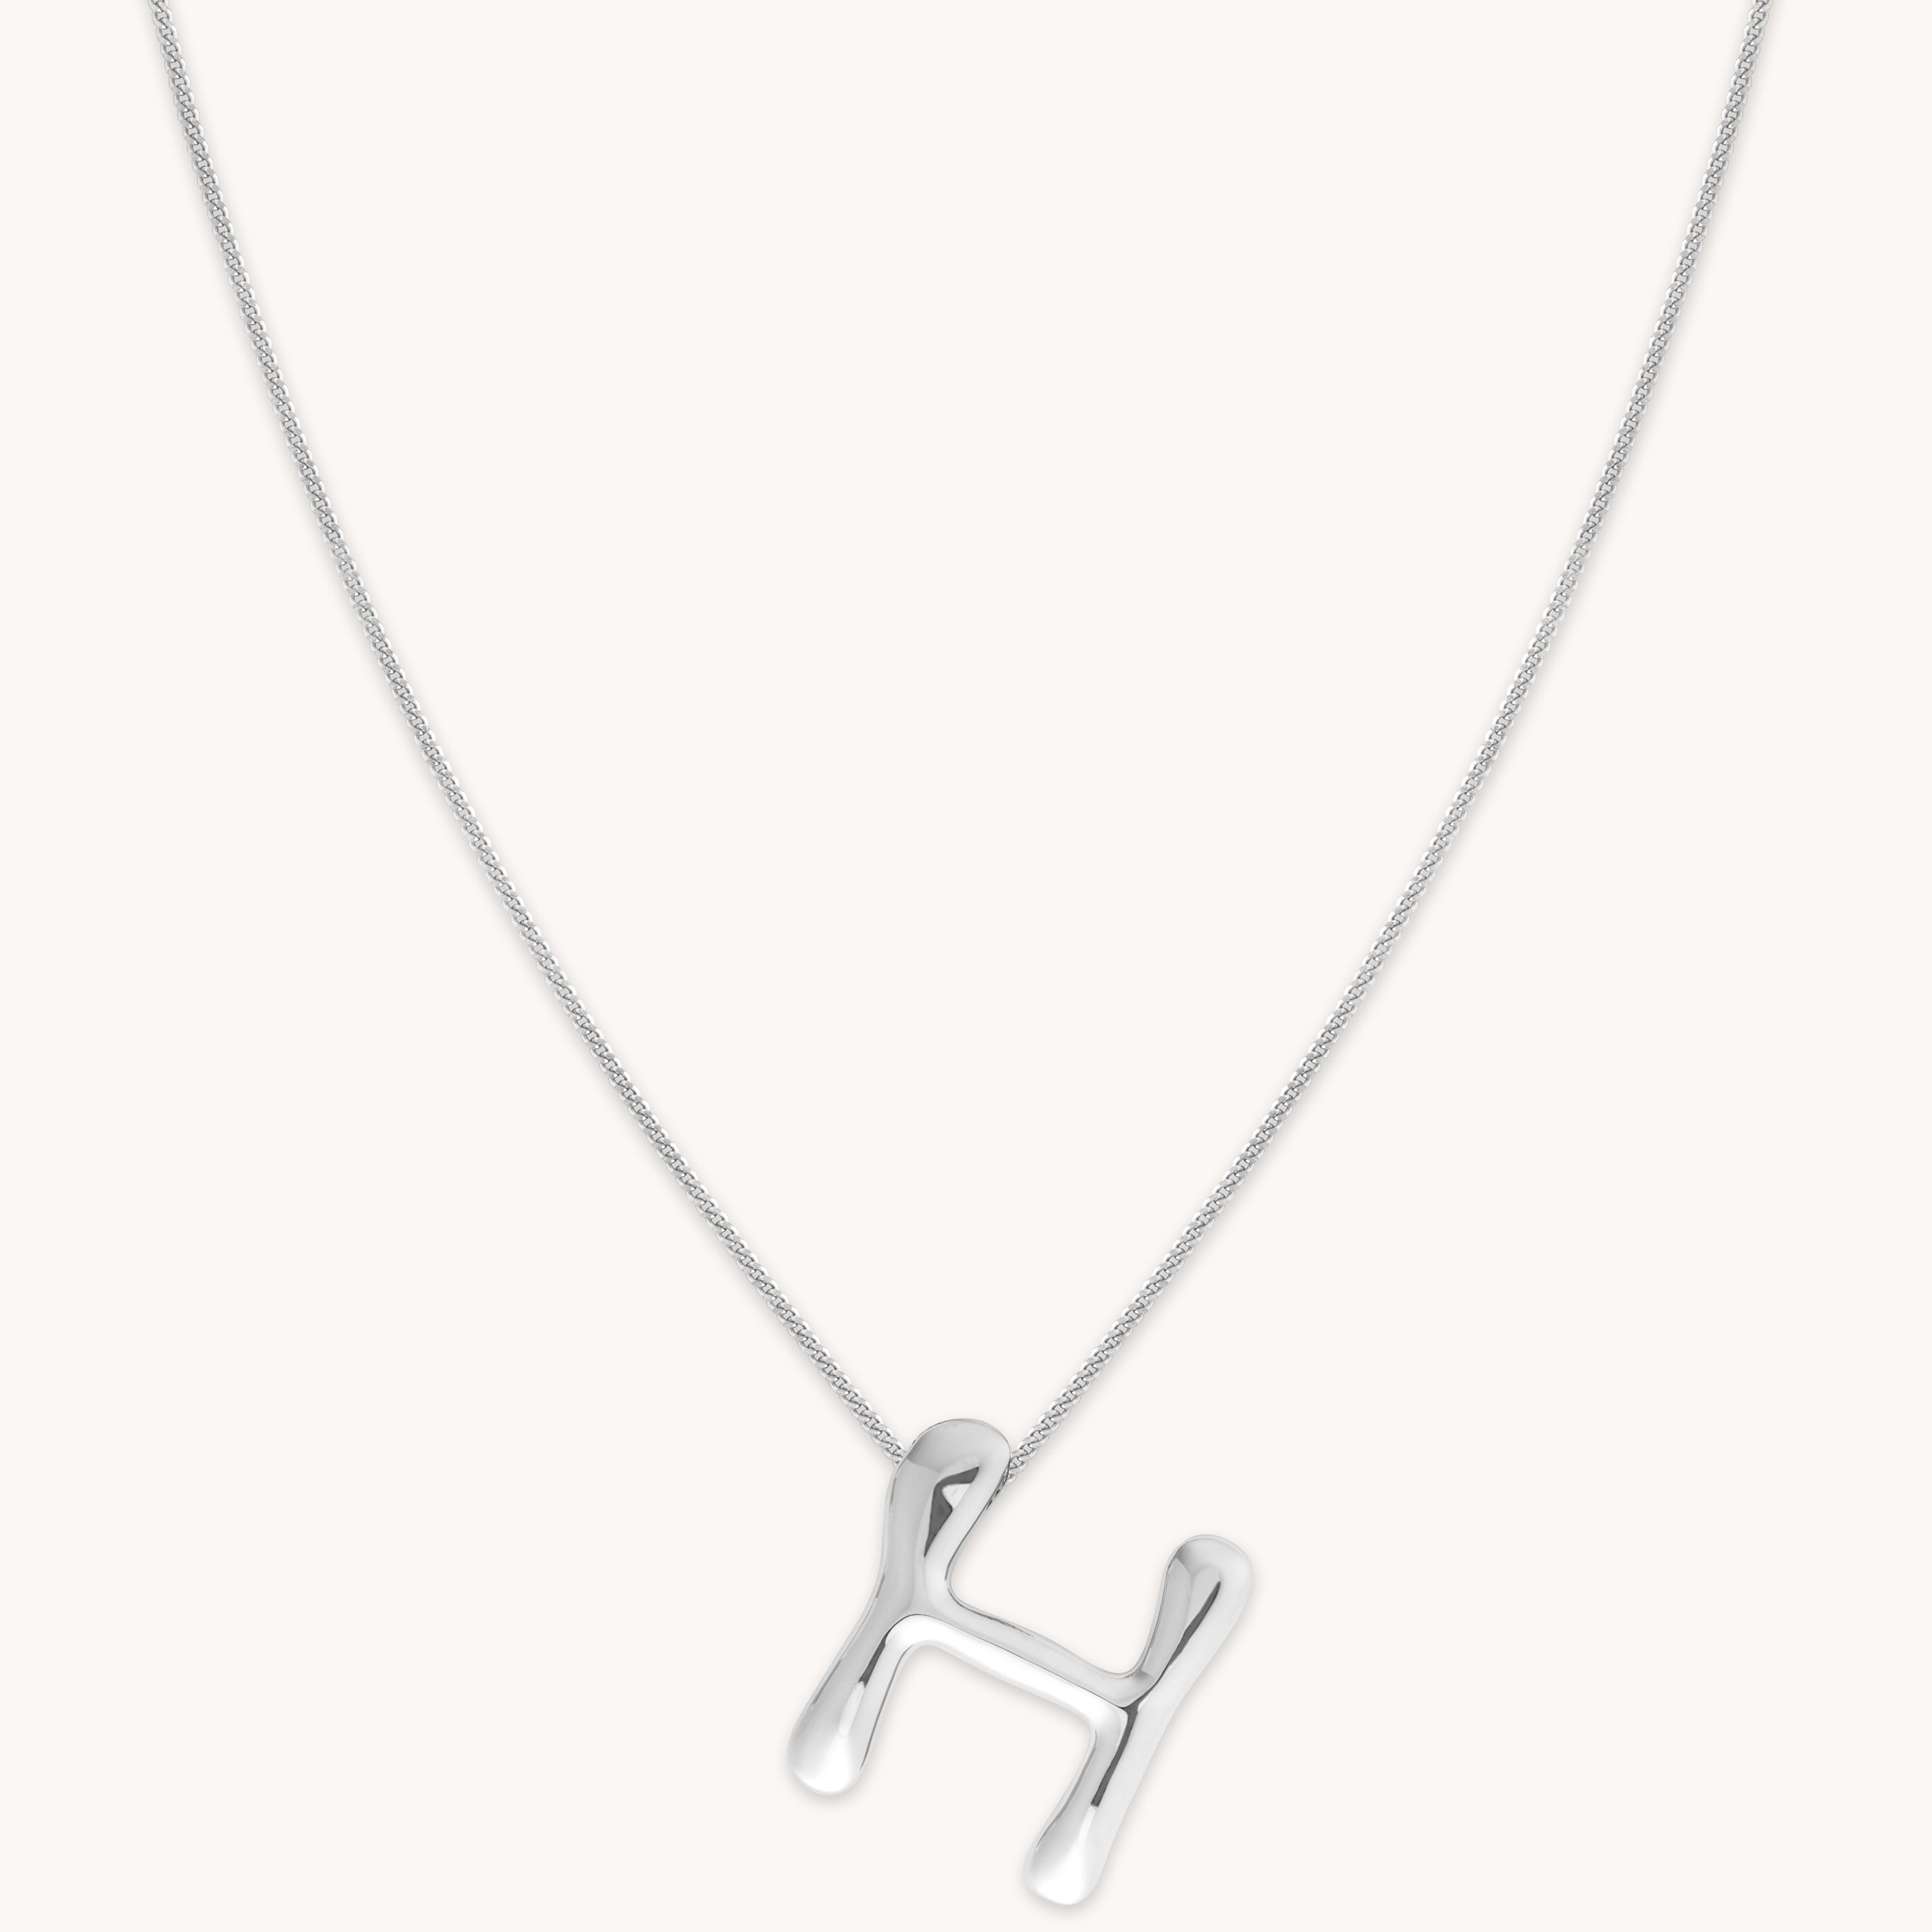 H Initial Bold Pendant Necklace in Silver